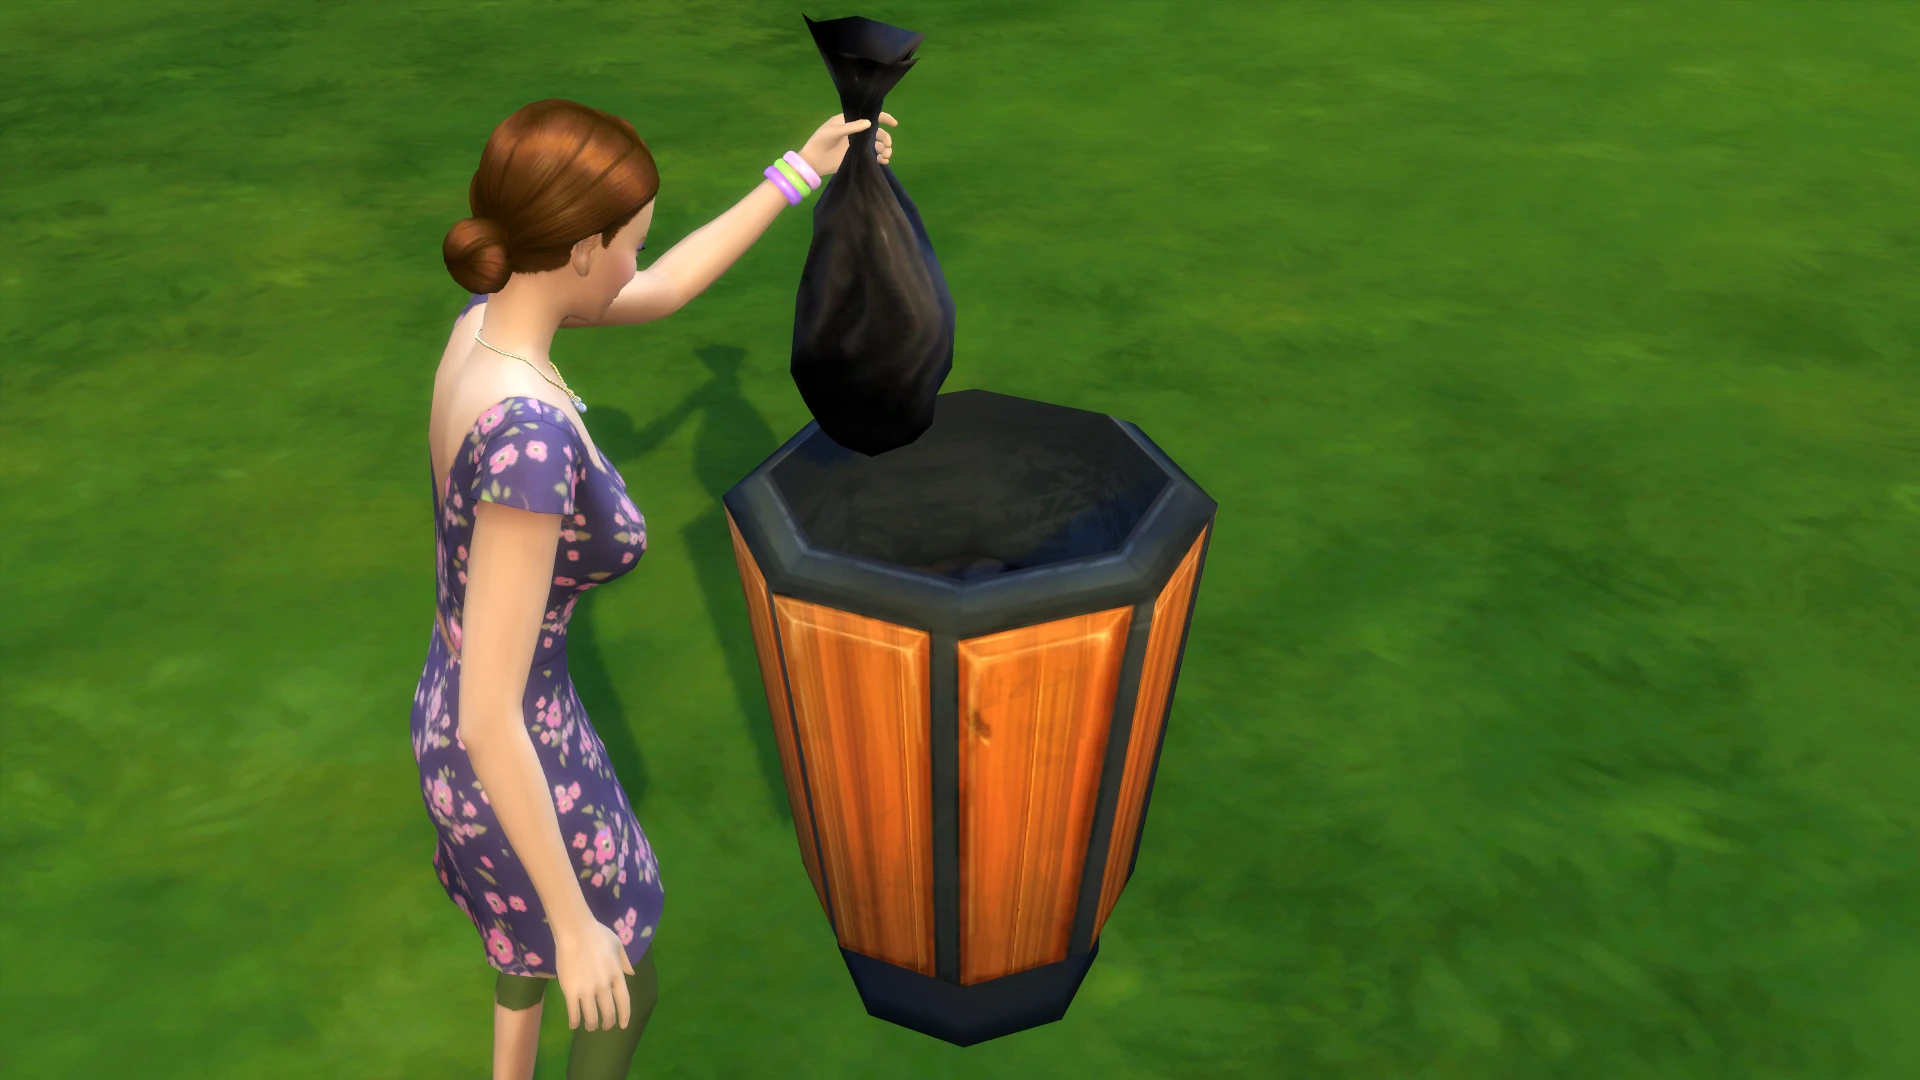 sims 4 where buy trash cans